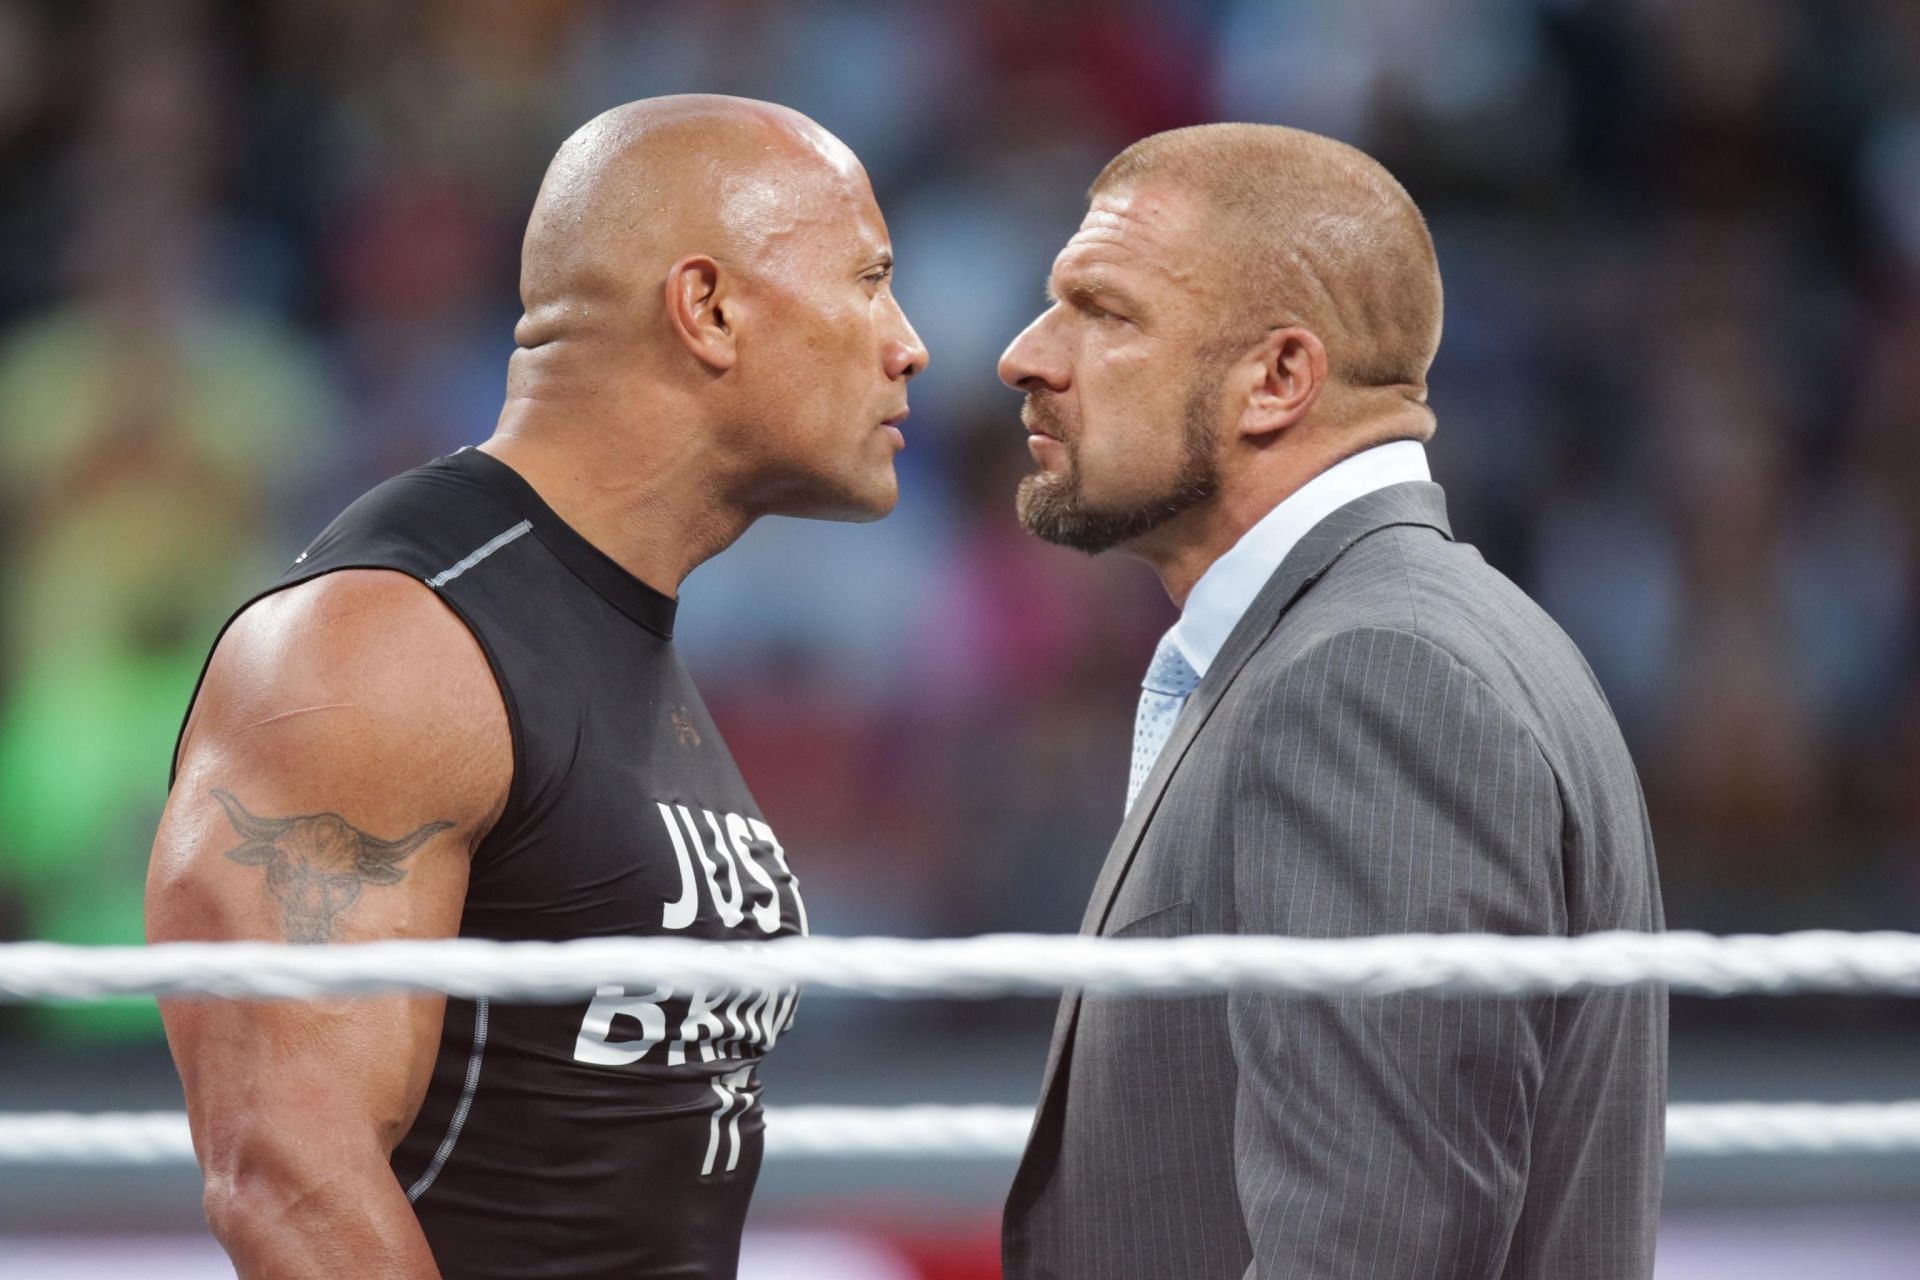 Former WWE Champions The Rock and Triple H